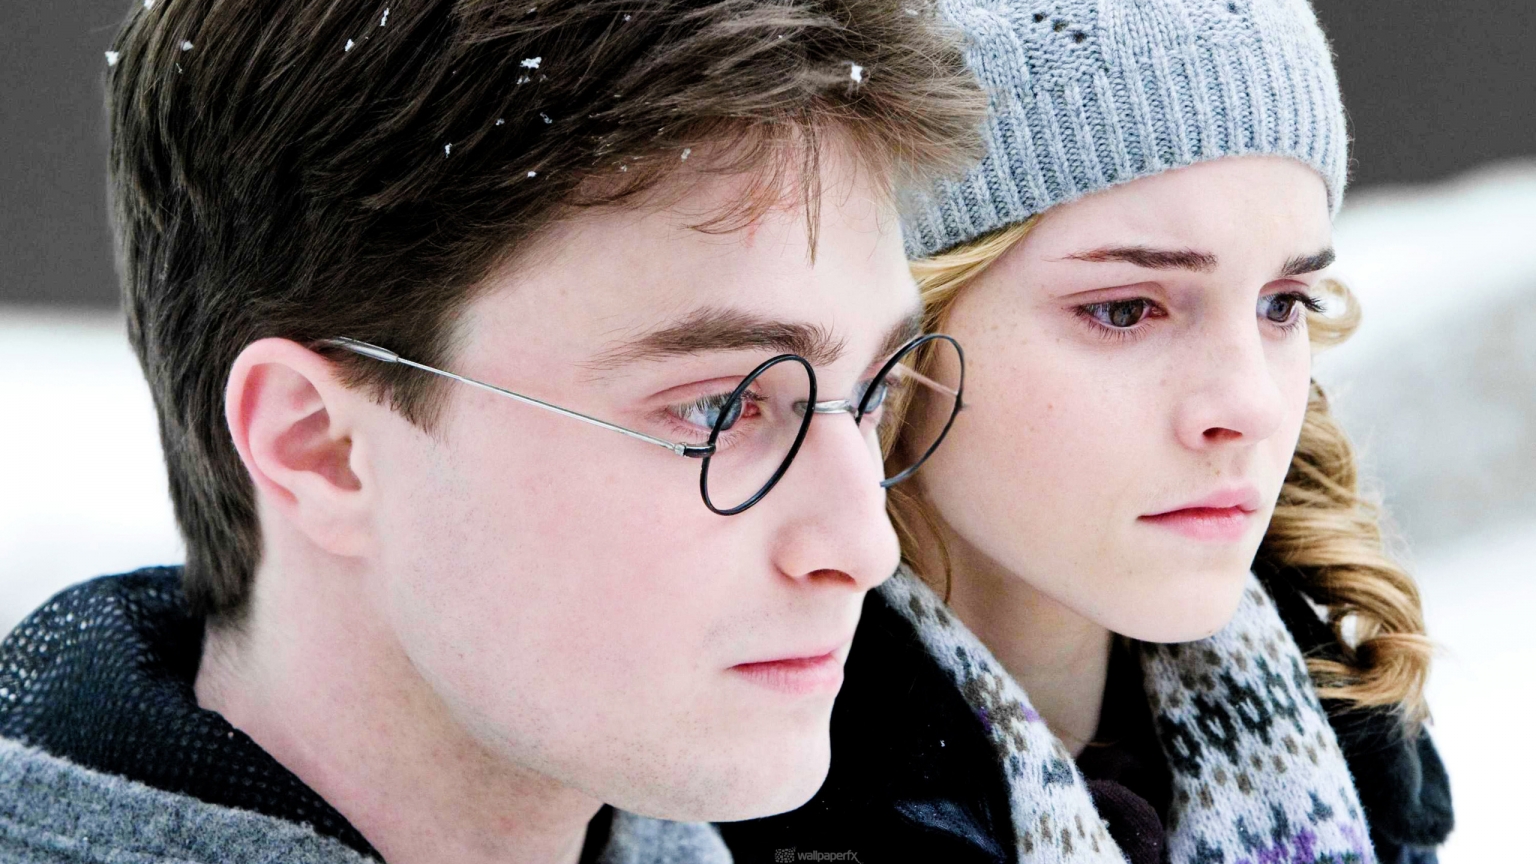 Harry and Hermione for 1536 x 864 HDTV resolution